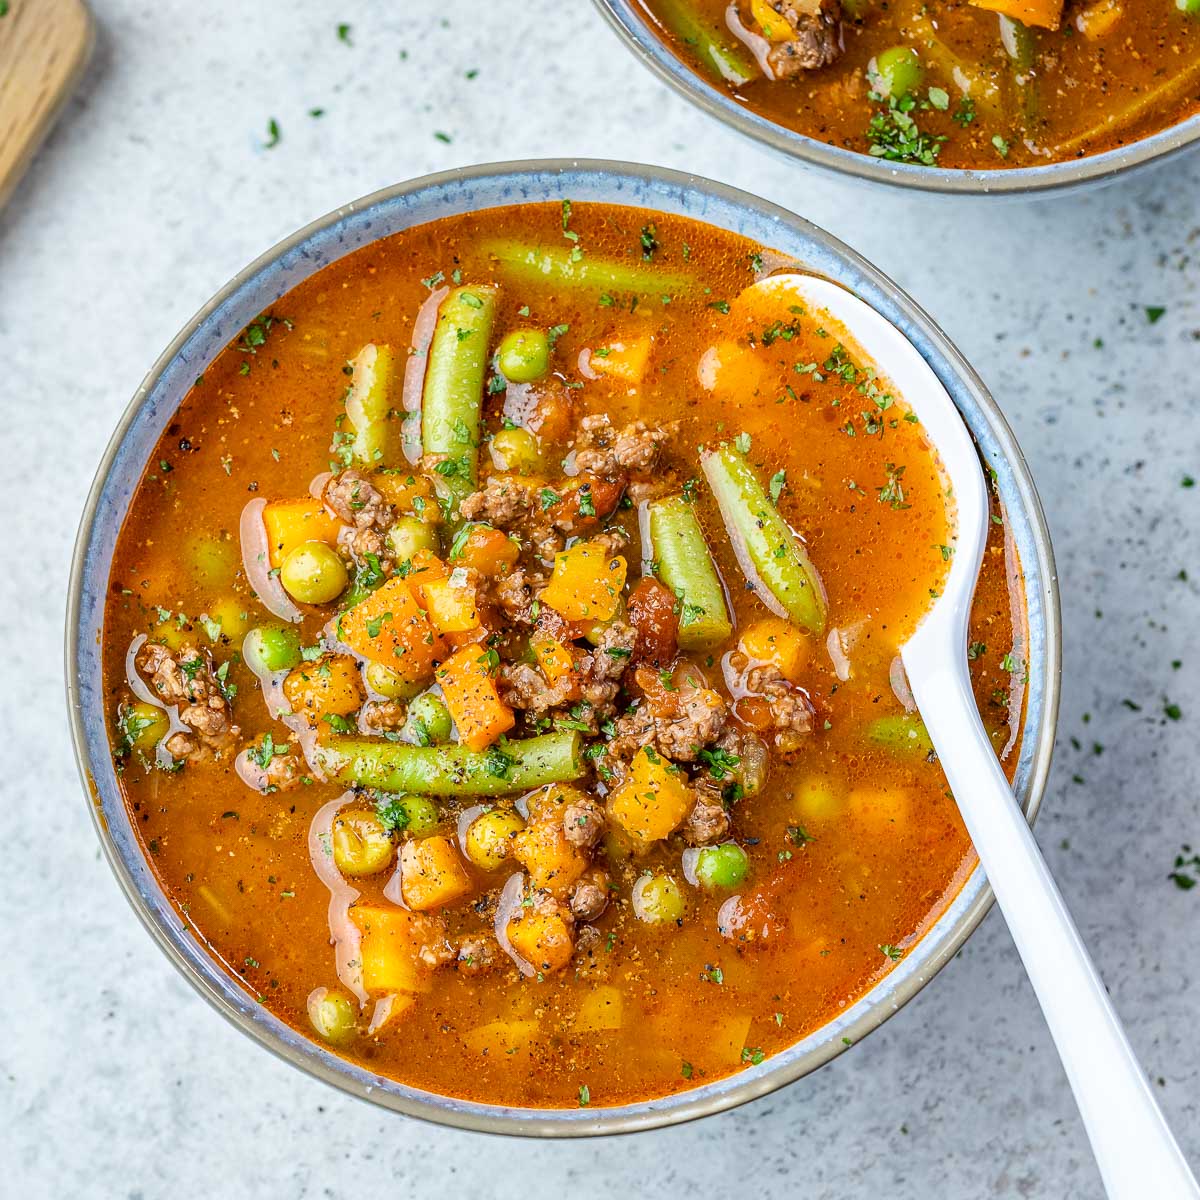 https://cleanfoodcrush.com/wp-content/uploads/2021/03/Clean-Food-Crush-Instant-Pot-Beef-Vegetable-Soup-Clean-Eating-Recipe.jpg